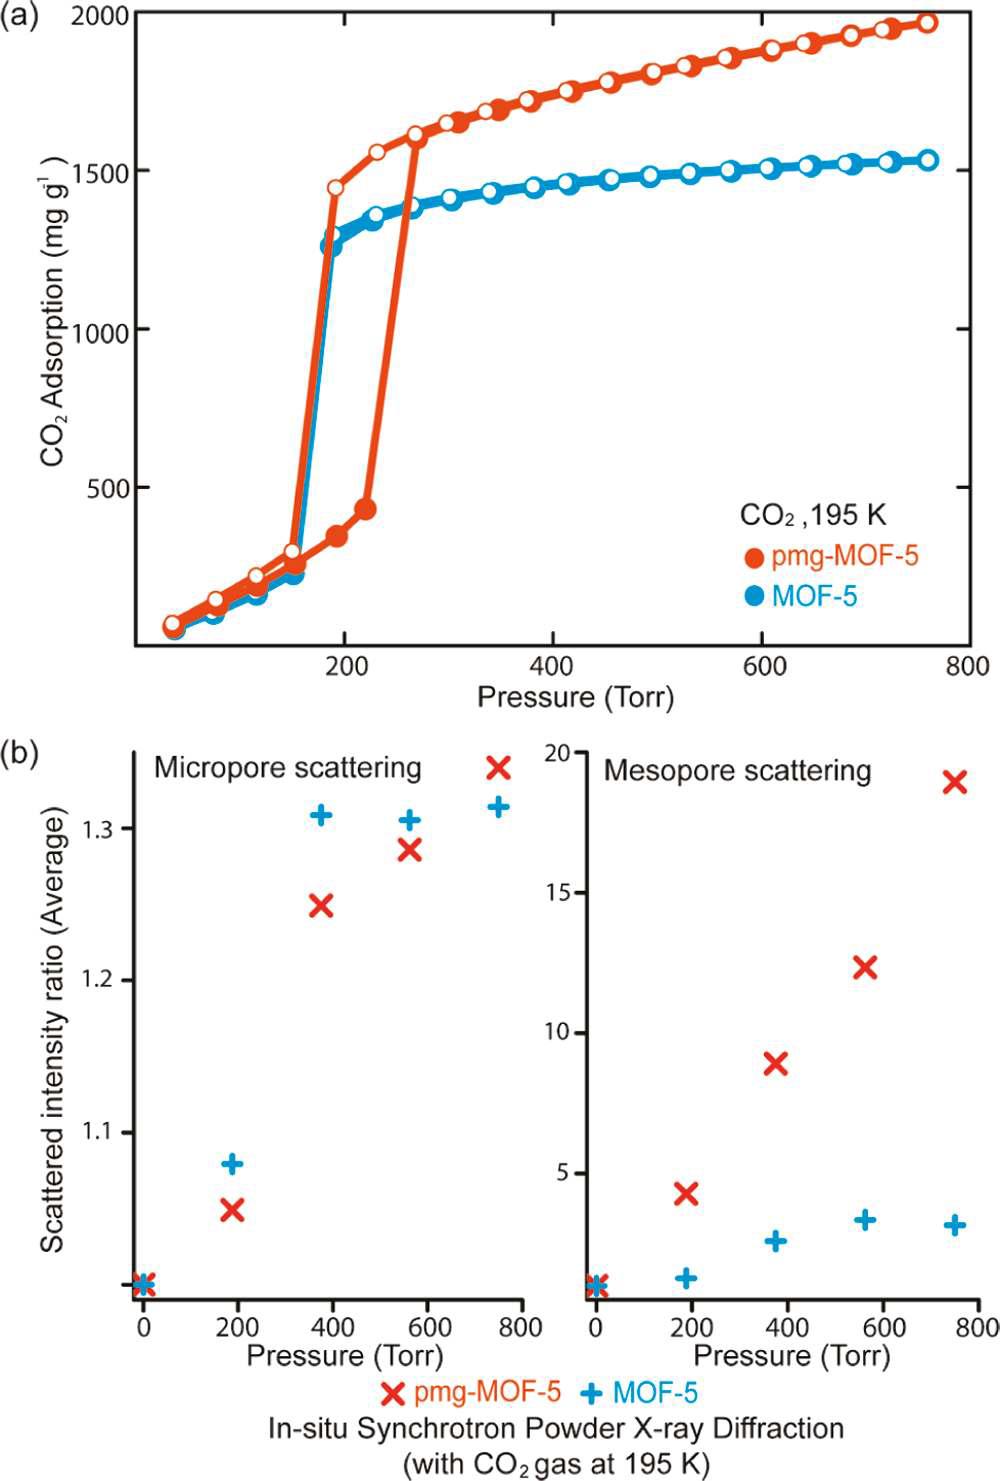 CO2 adsorptive properties for pmg-MOF-5 and MOF-5.